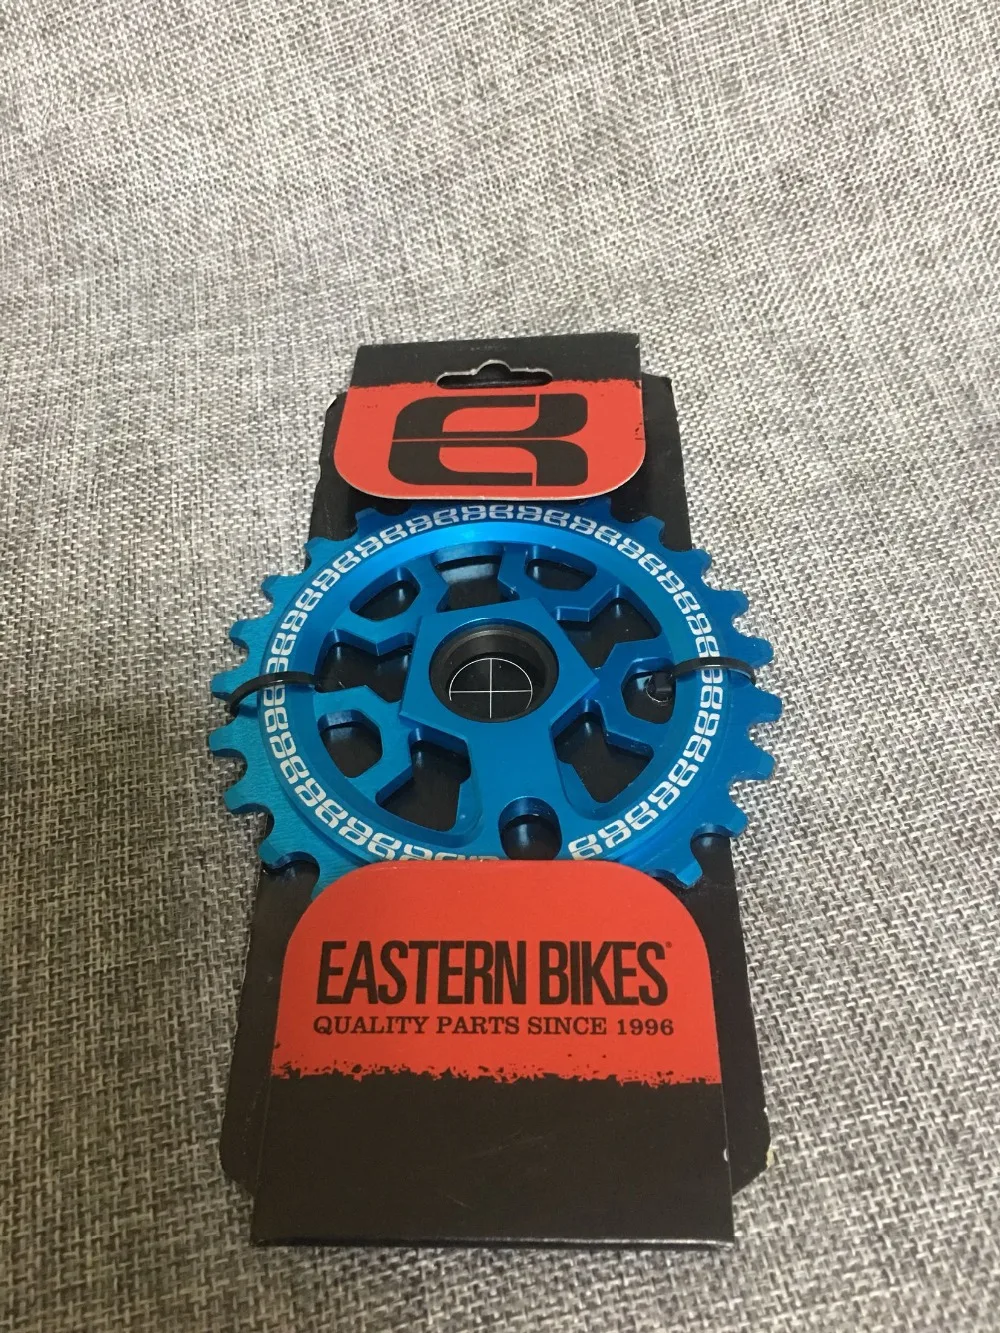 

Eastern bmx sprocket 25T full CNC 7075-T6 chainwheel bmx sprockets made in Taiwan 19mm adapter included